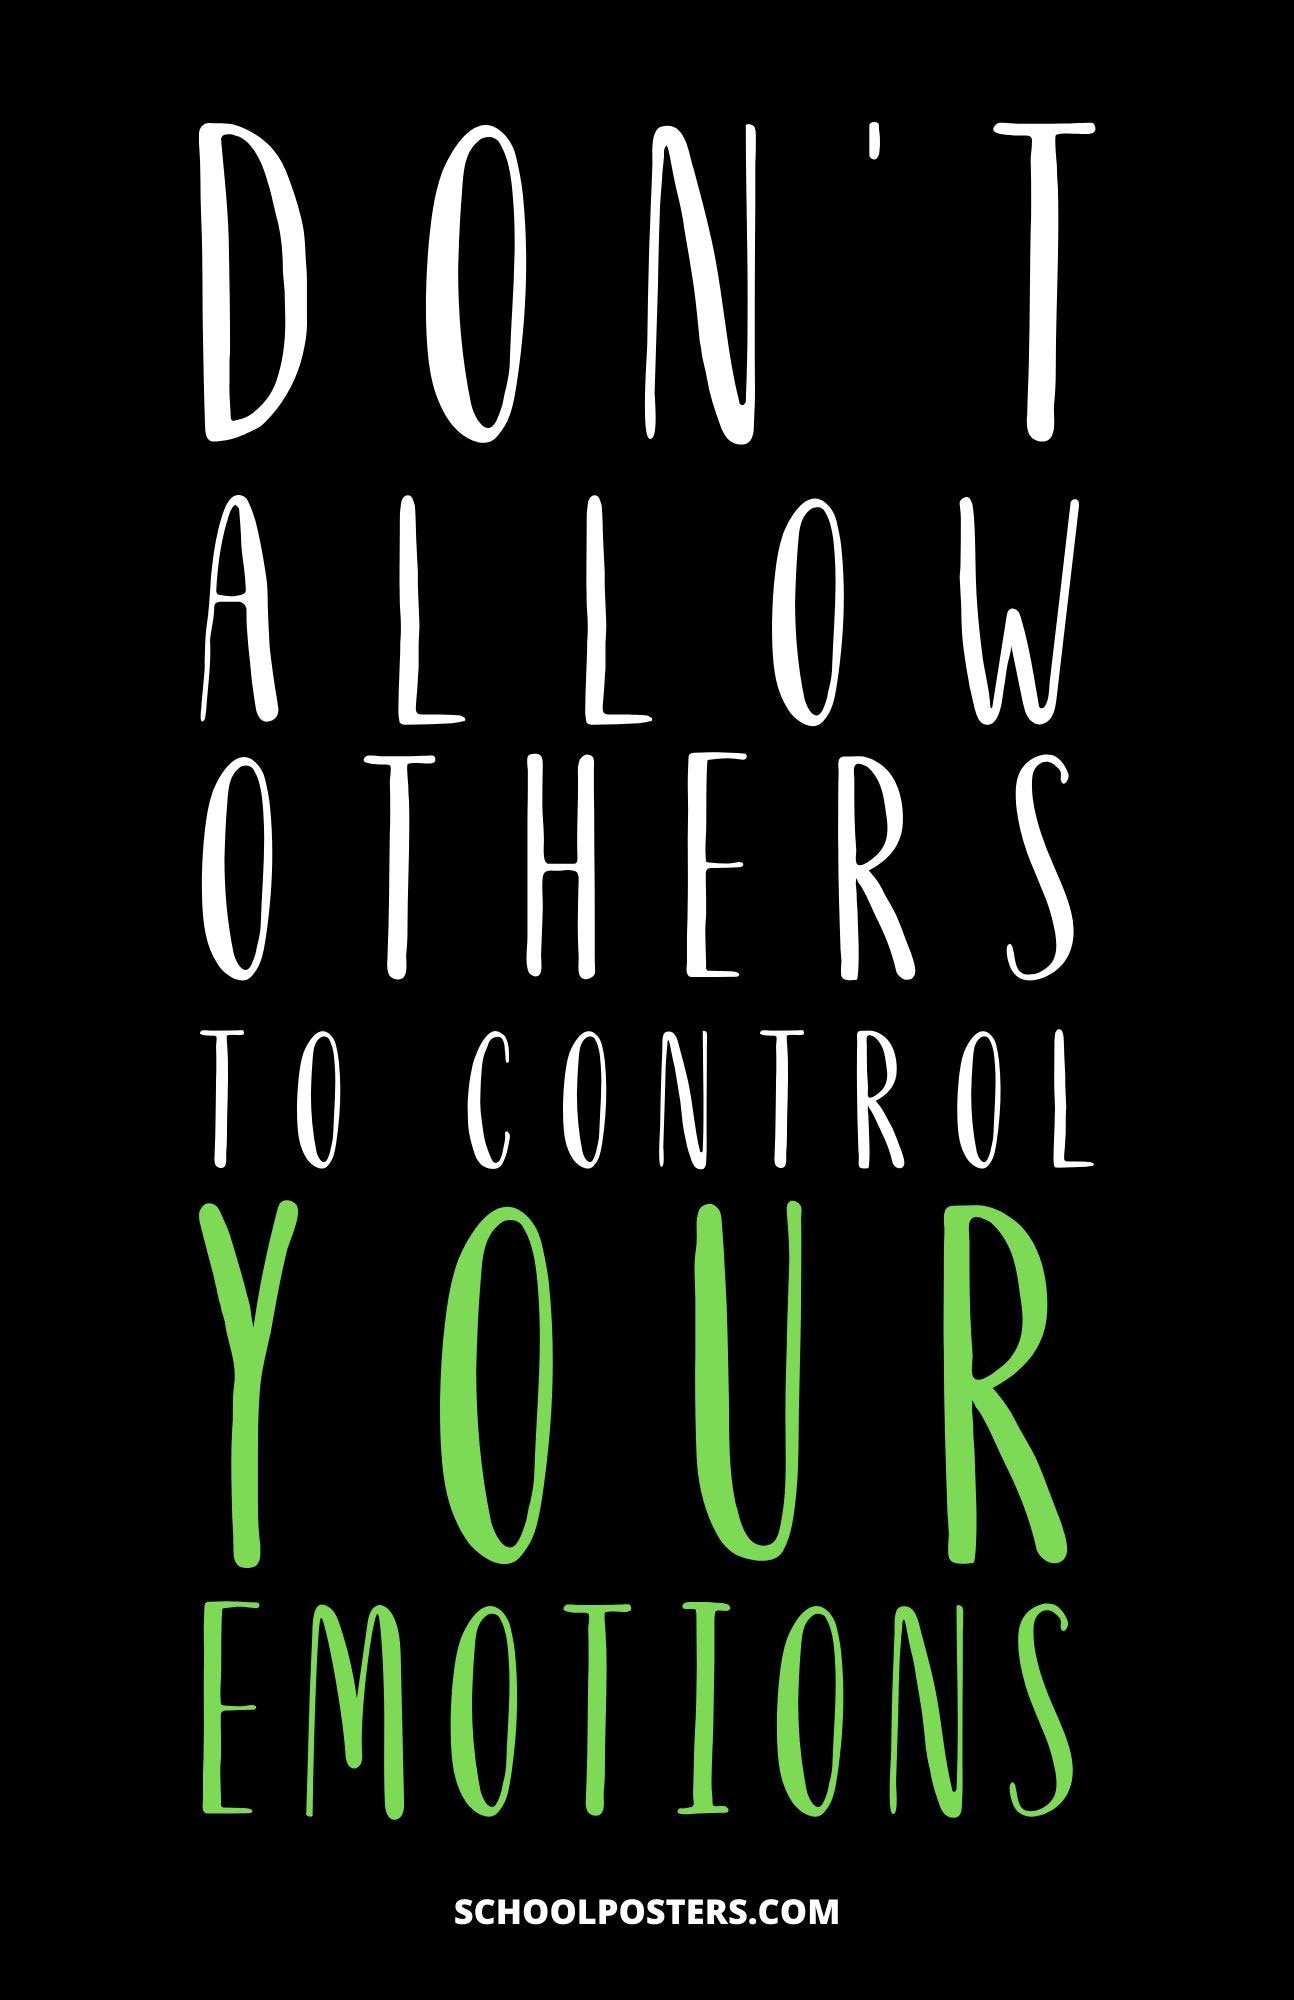 Don’t Allow Others to Control Your Emotions Poster